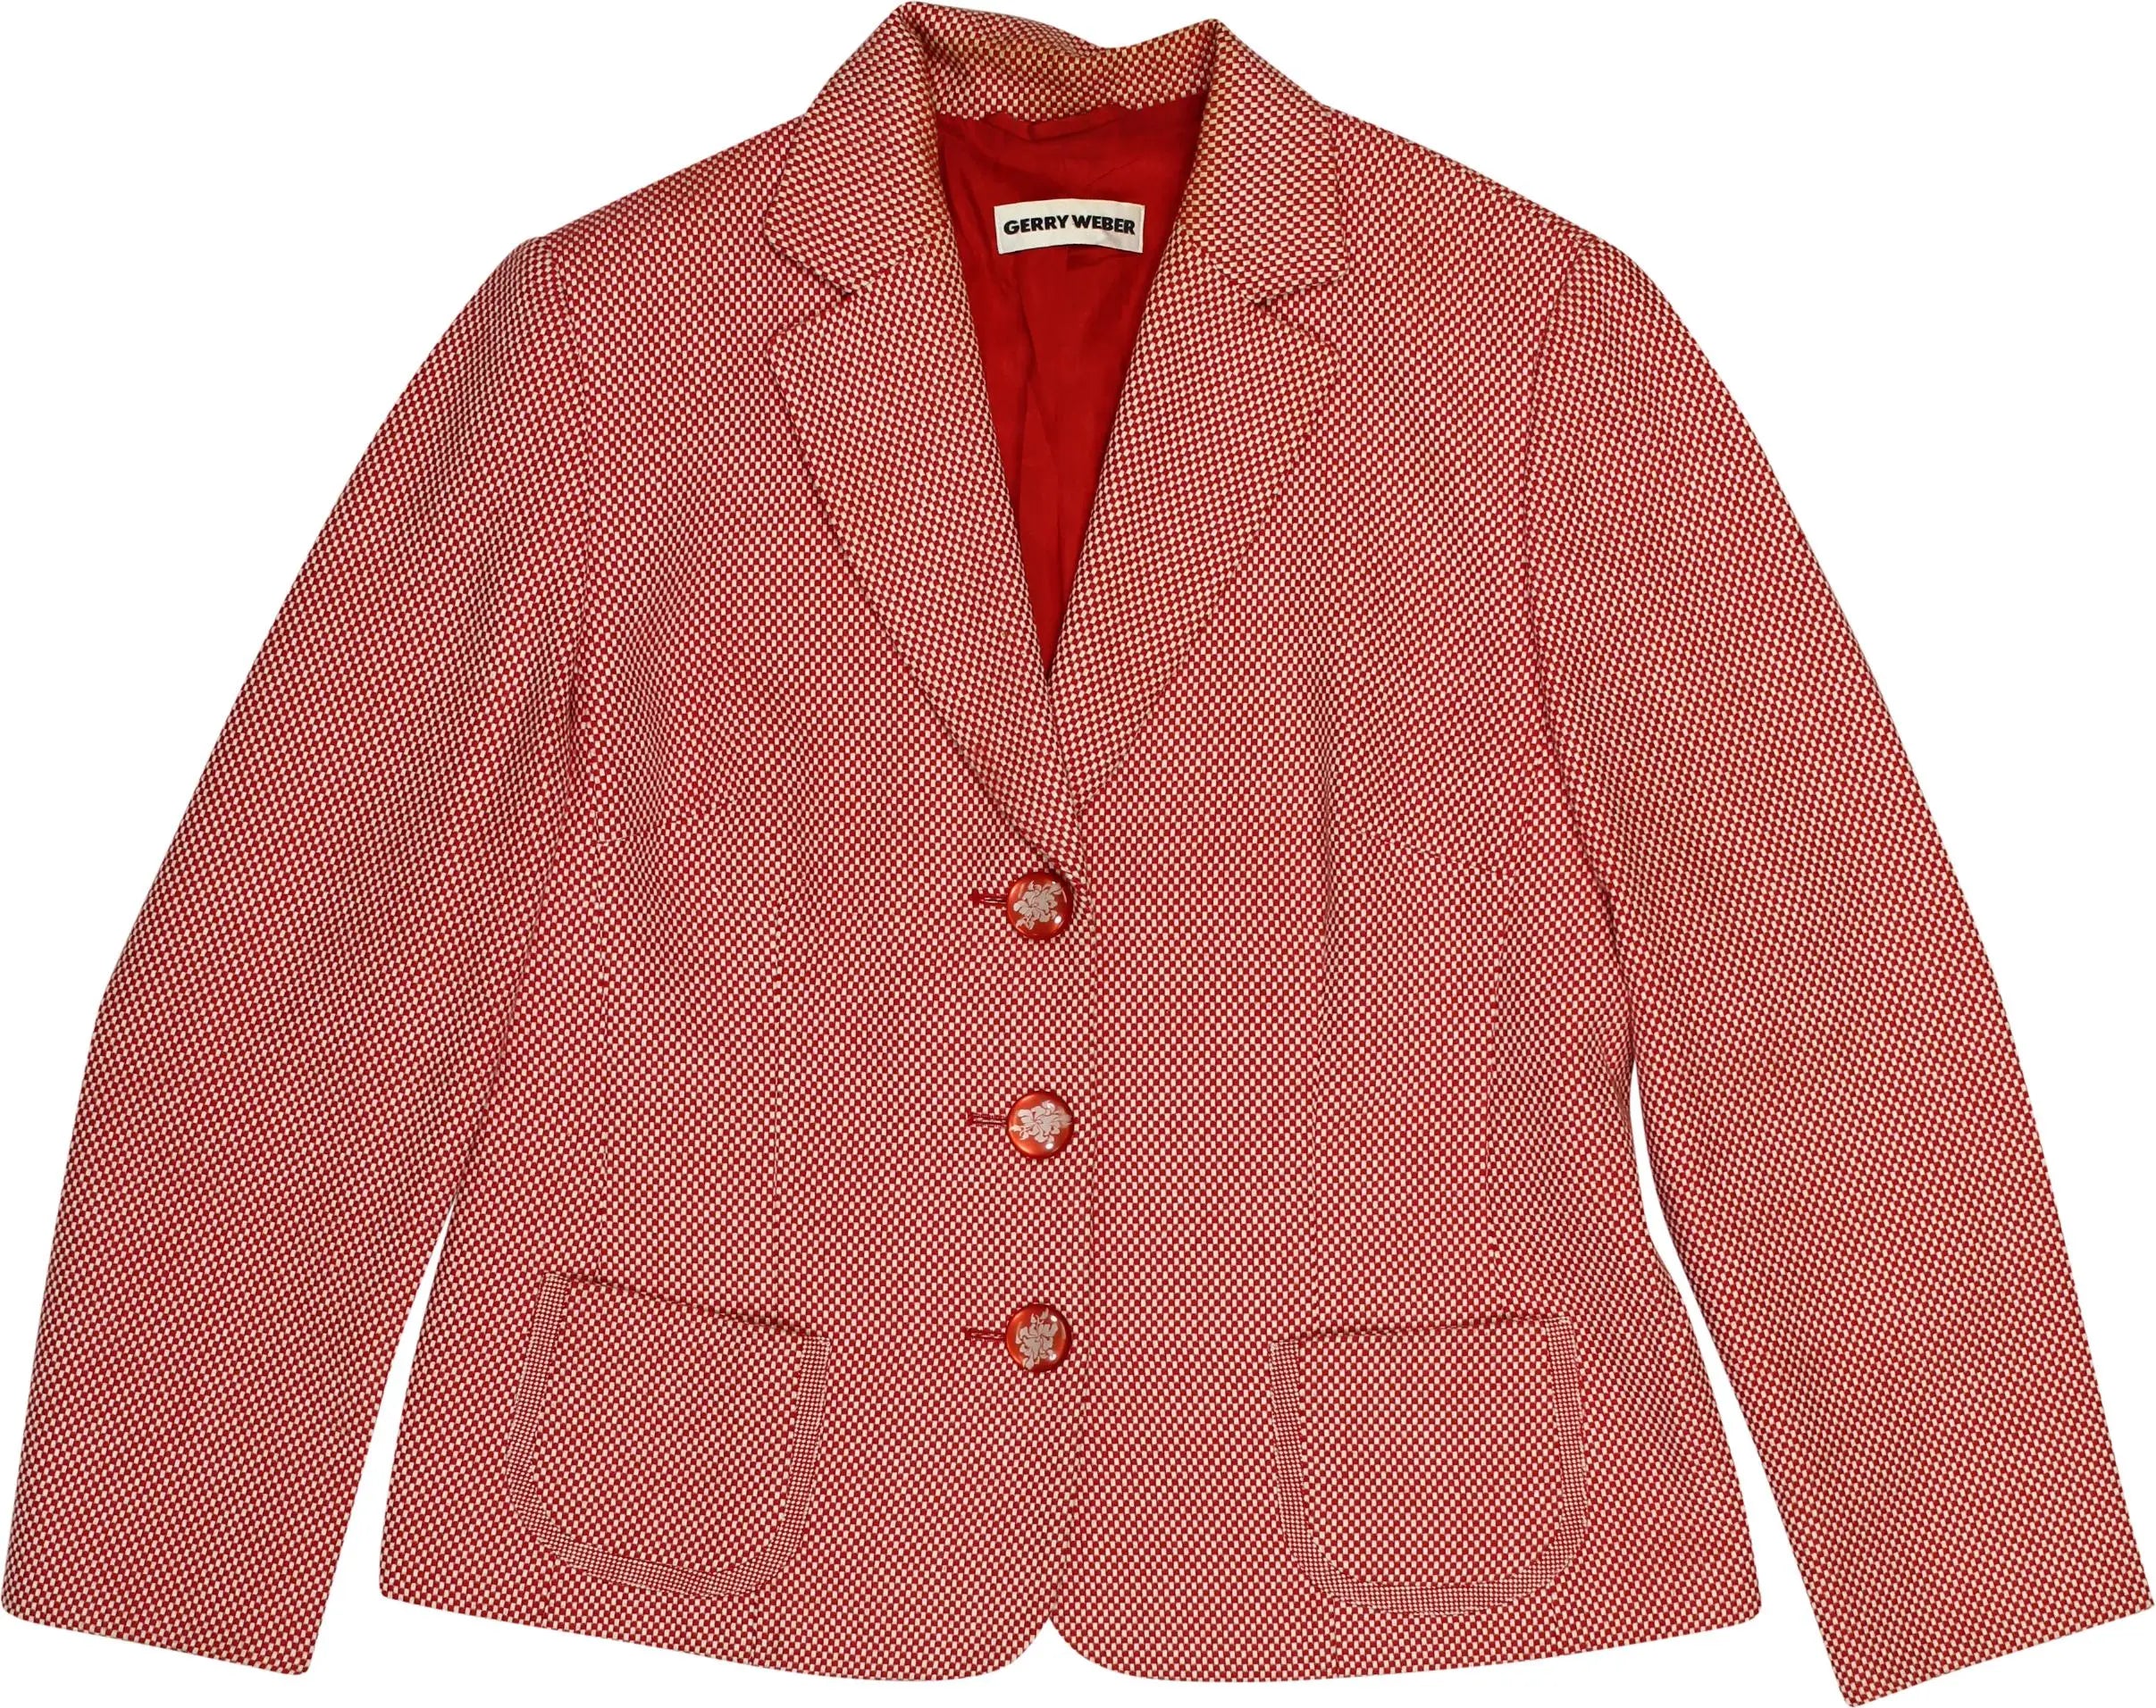 Gerry Weber - Blazer- ThriftTale.com - Vintage and second handclothing